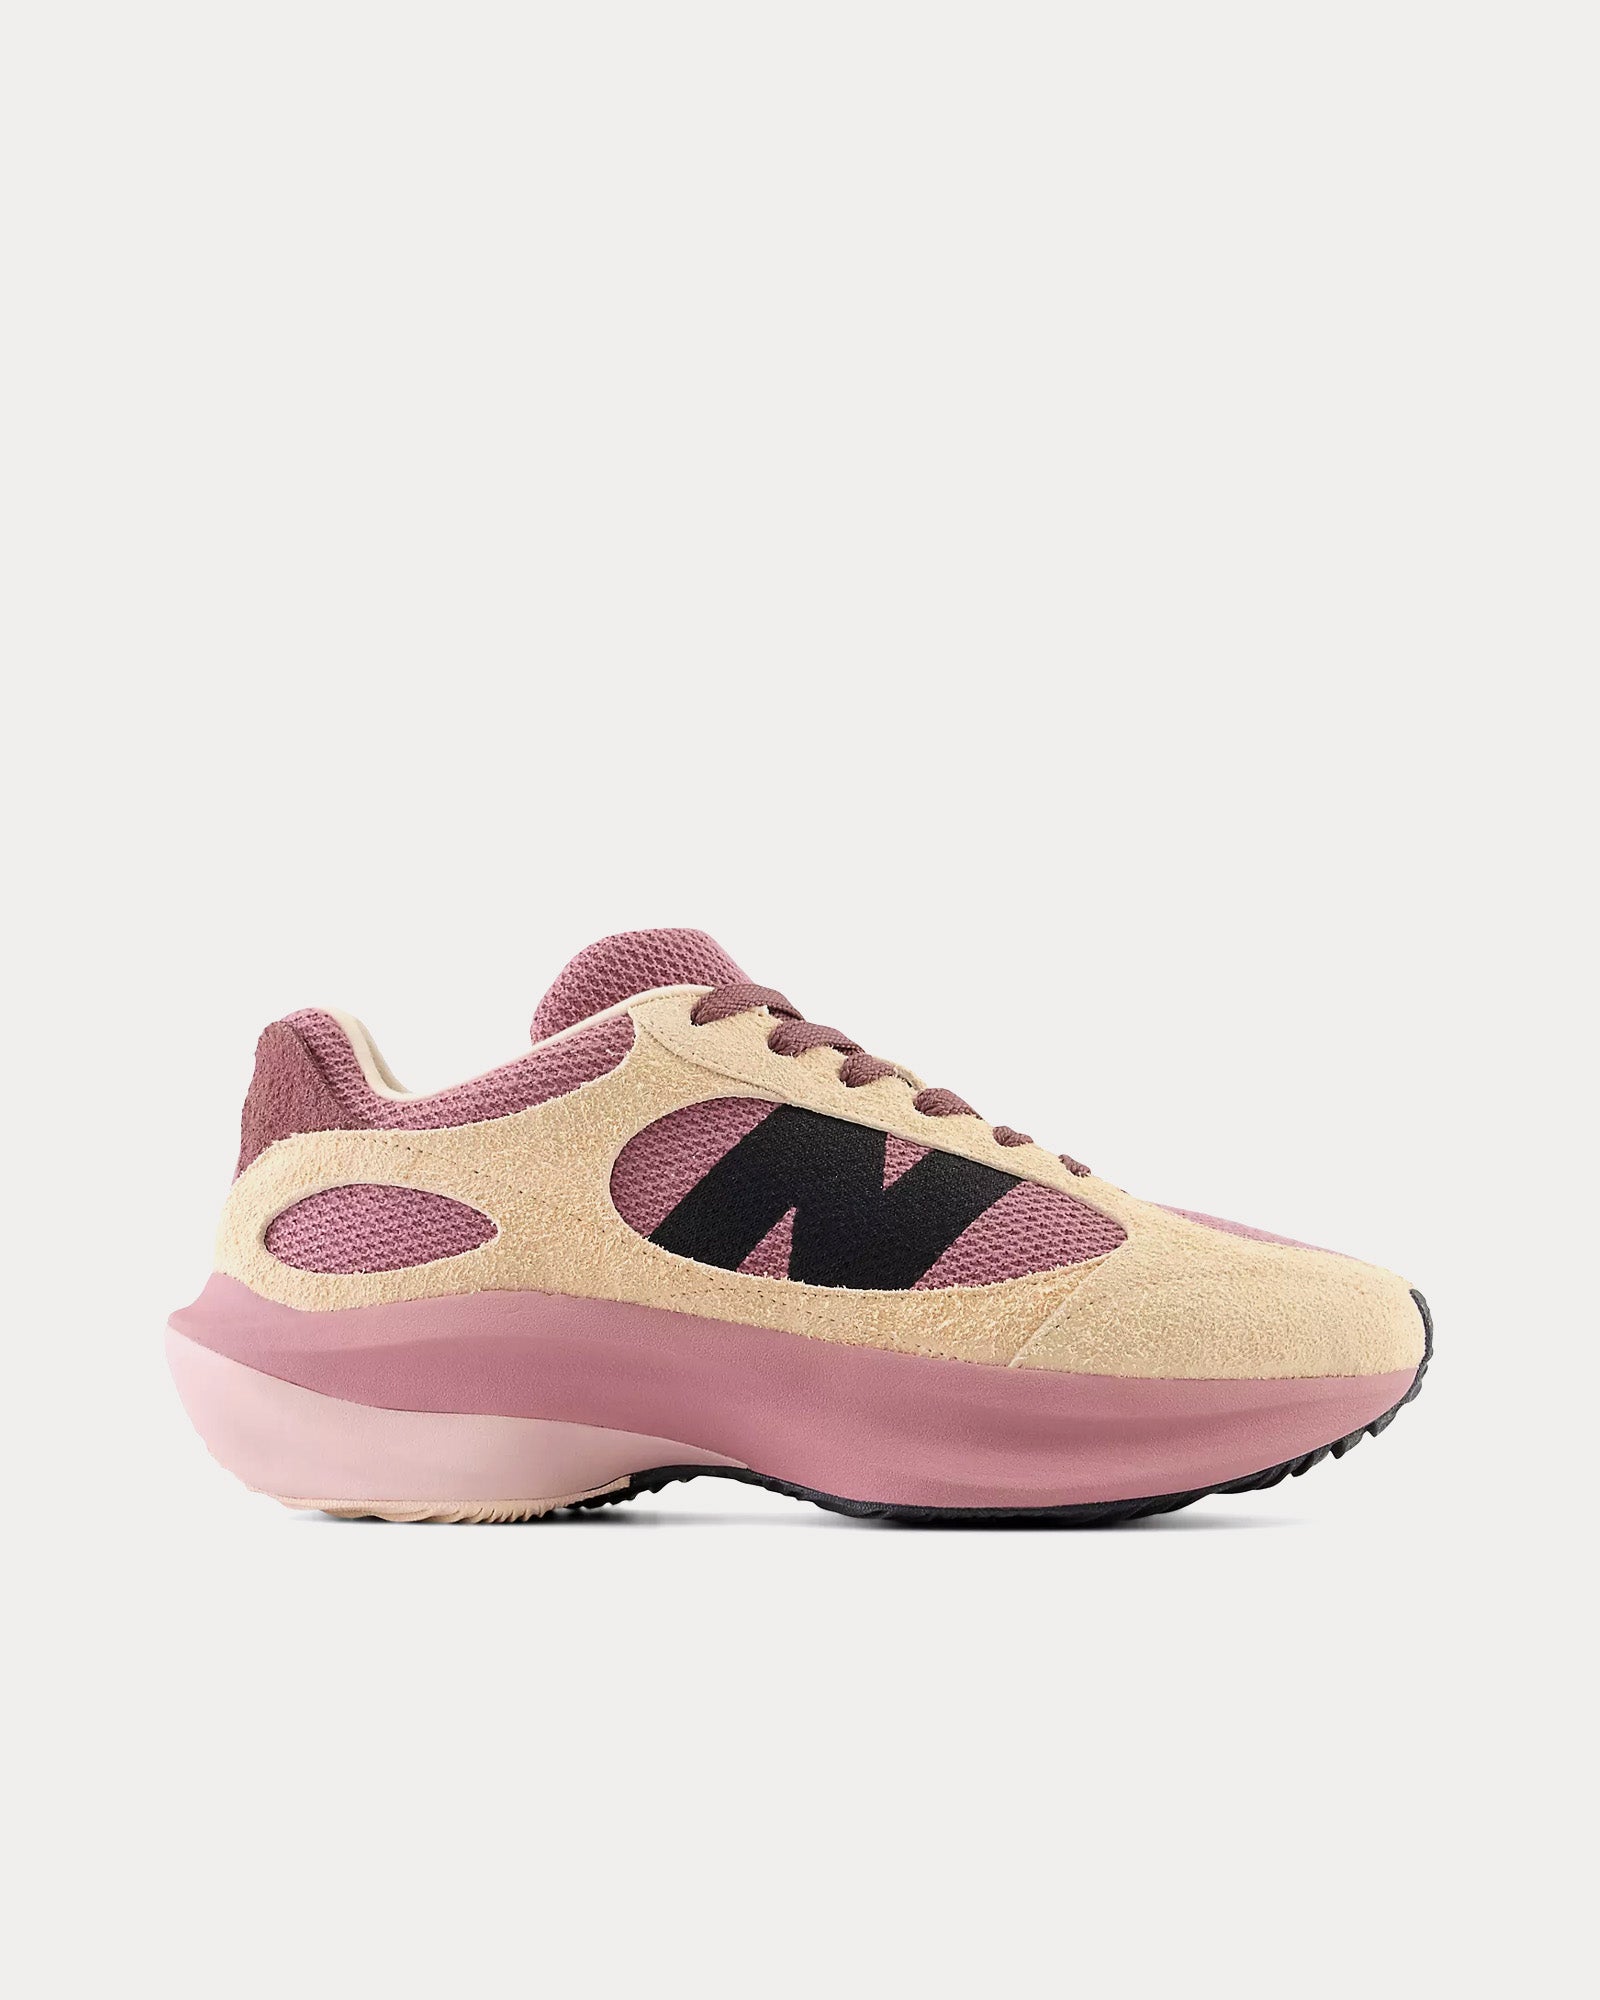 New Balance - WRPD Runner Licorice / Rosewood Low Top Sneakers